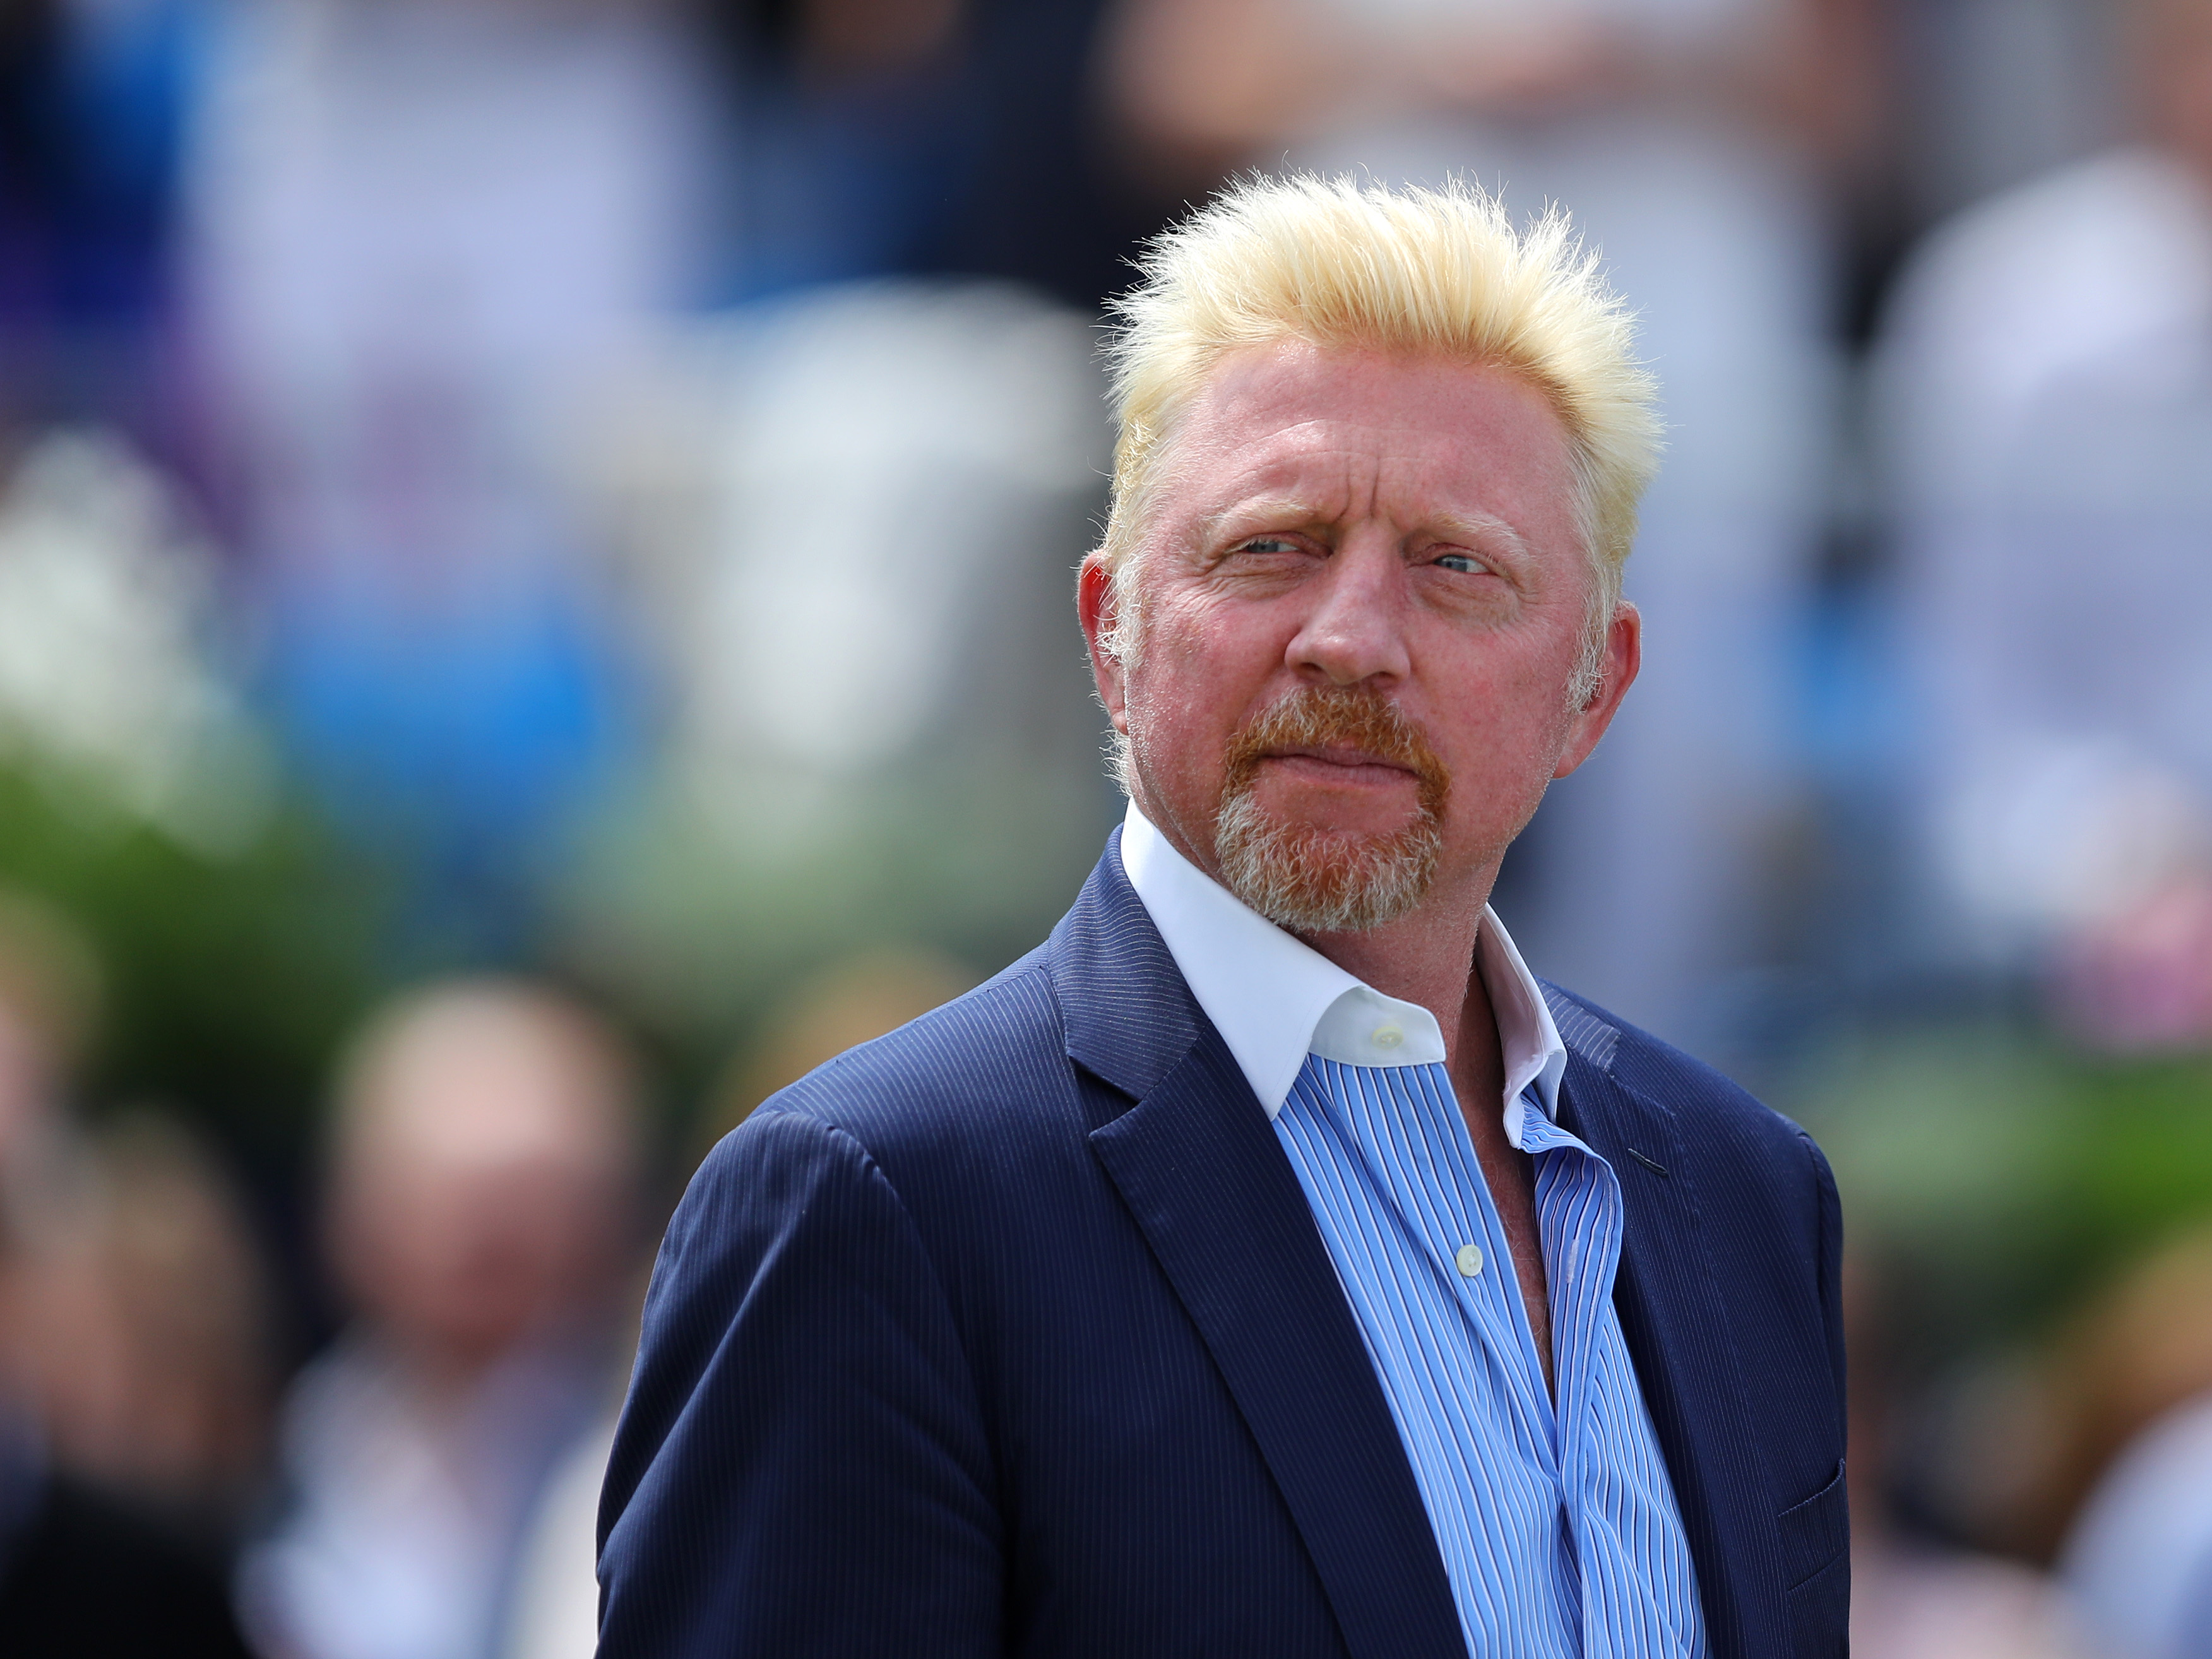 Boris Becker to sell his Grand Slam Trophies to pay off debts